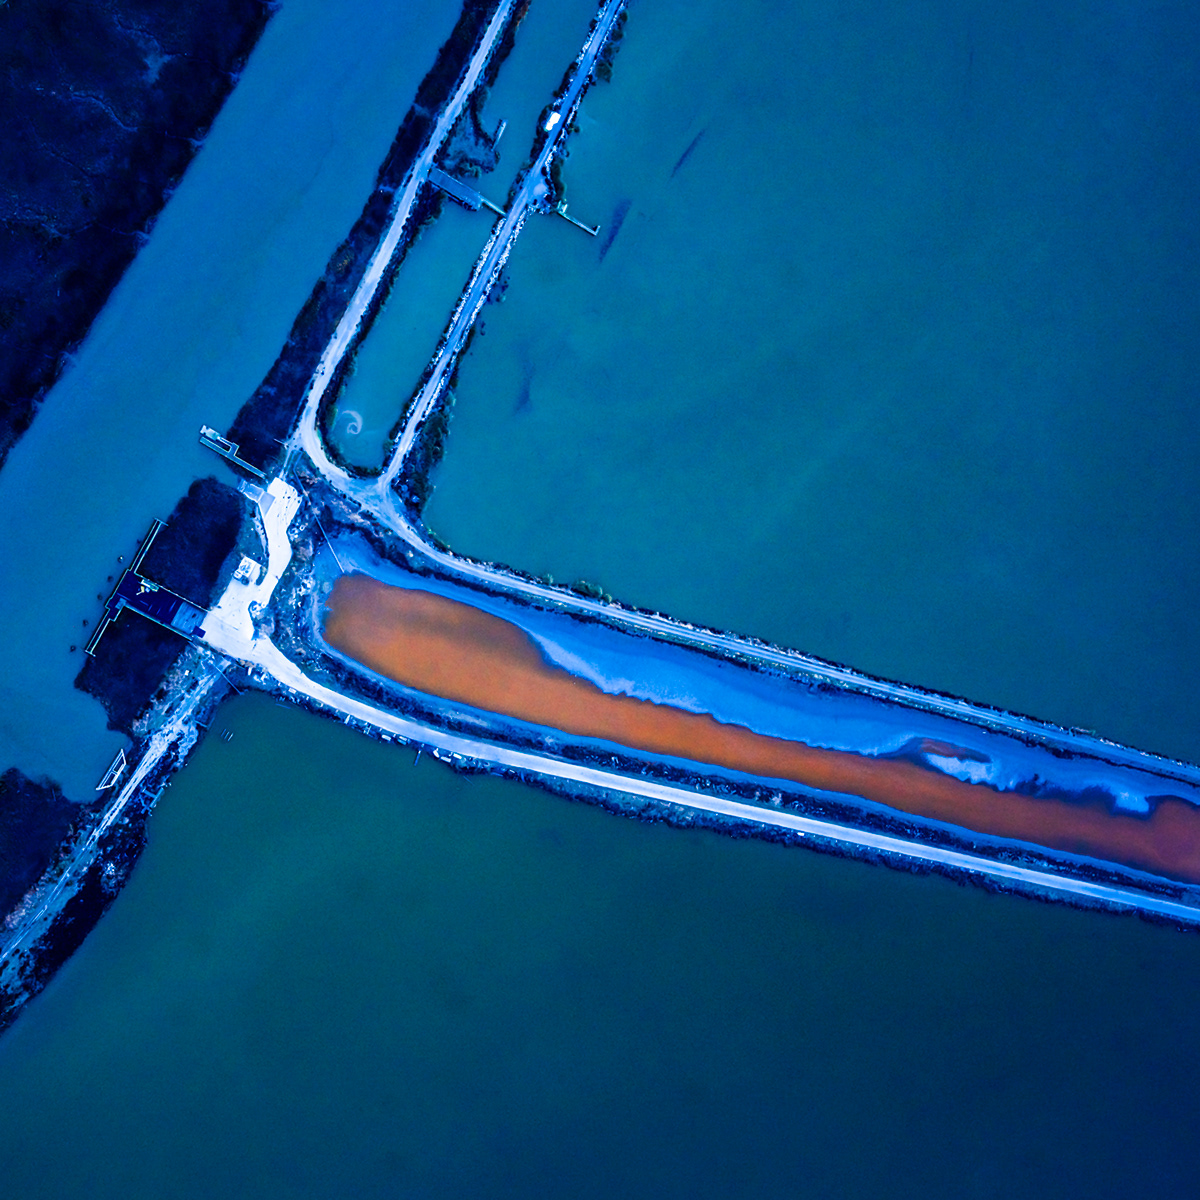 Aerial Landscape mitch rouse phase one Salt san francisco scenic Shotover Travel